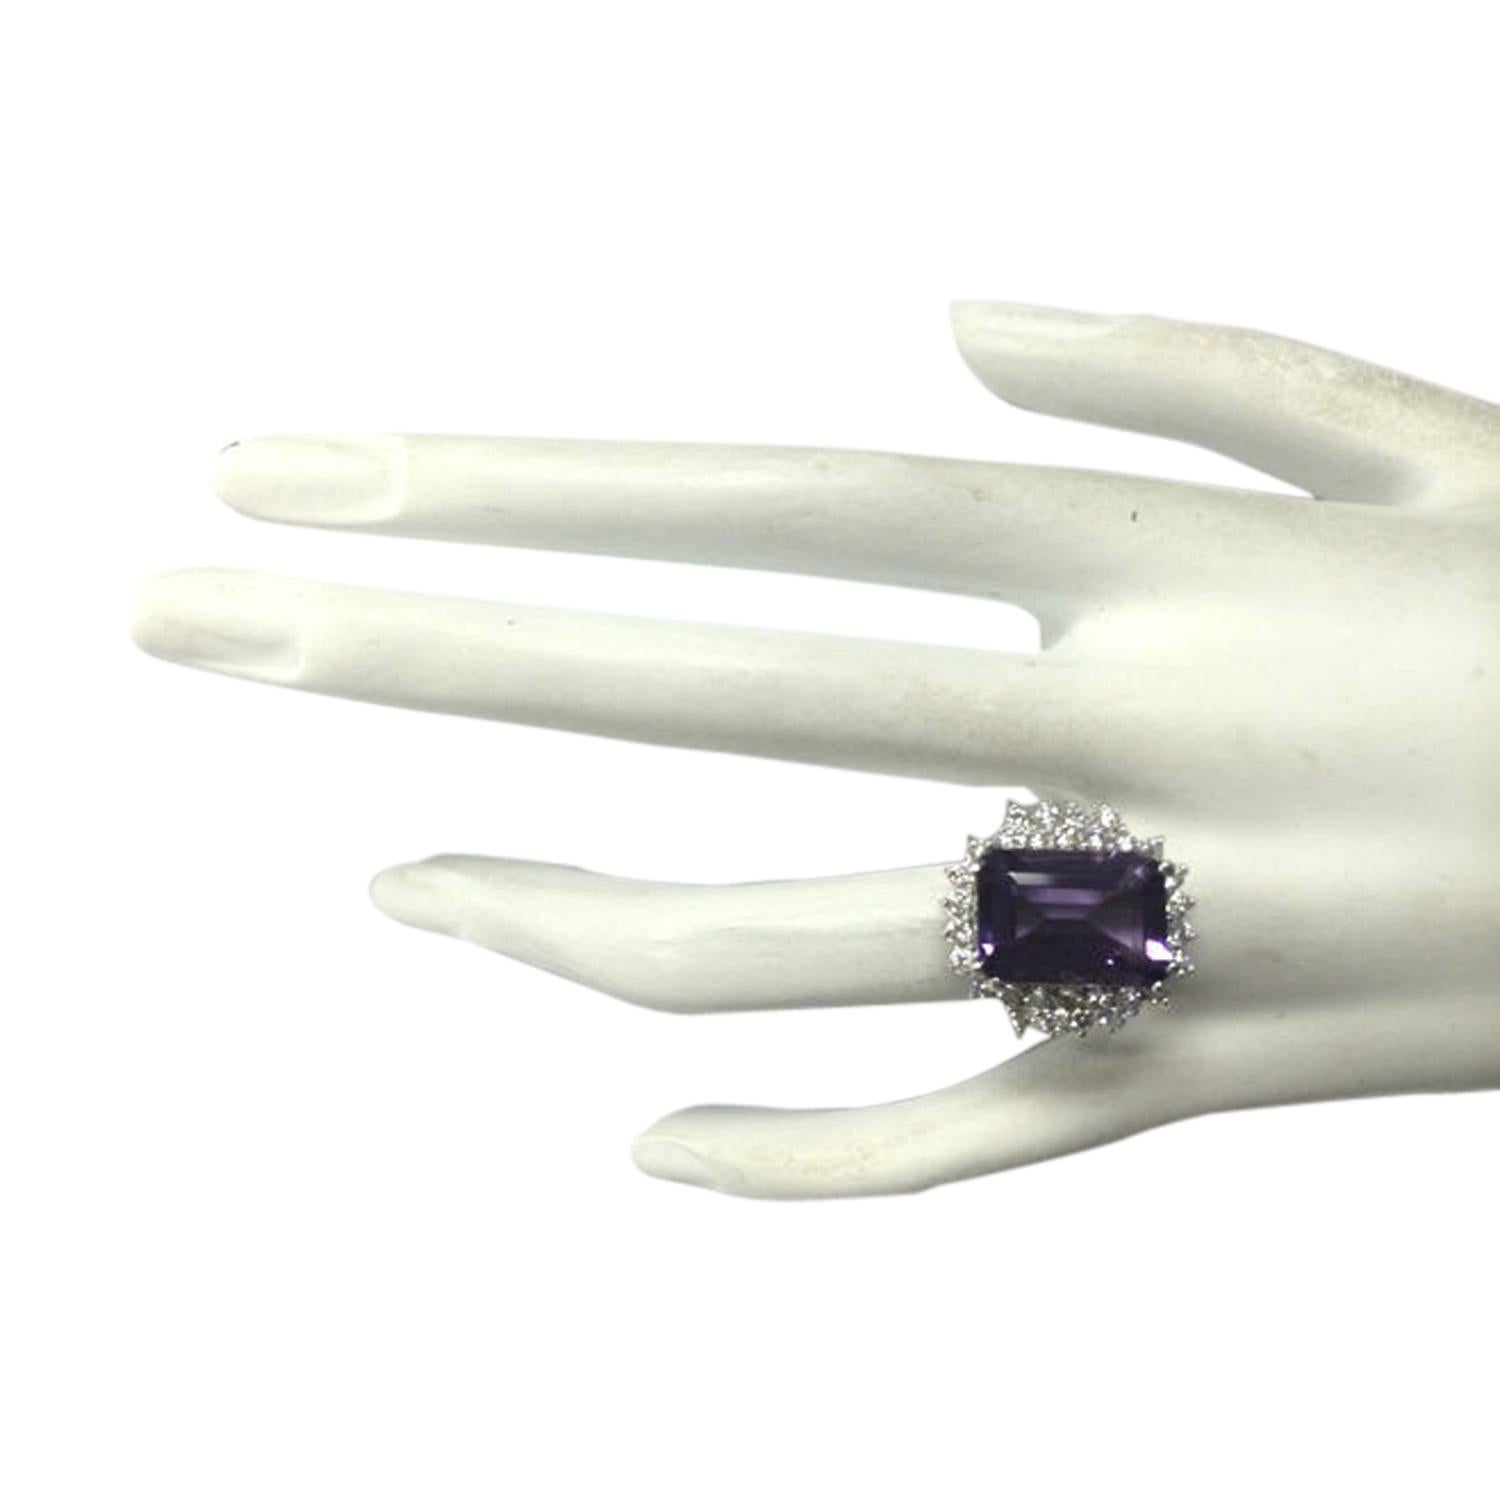 7.50 Carat Natural Amethyst 14 Karat Solid White Gold Diamond Ring
Stamped: 14K
Total Ring Weight: 8.2 Grams 
Amethyst Weight: 6.50 Carat (14.00x10.00 Millimeters) 
Diamond Weight: 1.00 Carat (F-G Color, VS2-SI1 Clarity )
Diamond Quantity: 30
Face